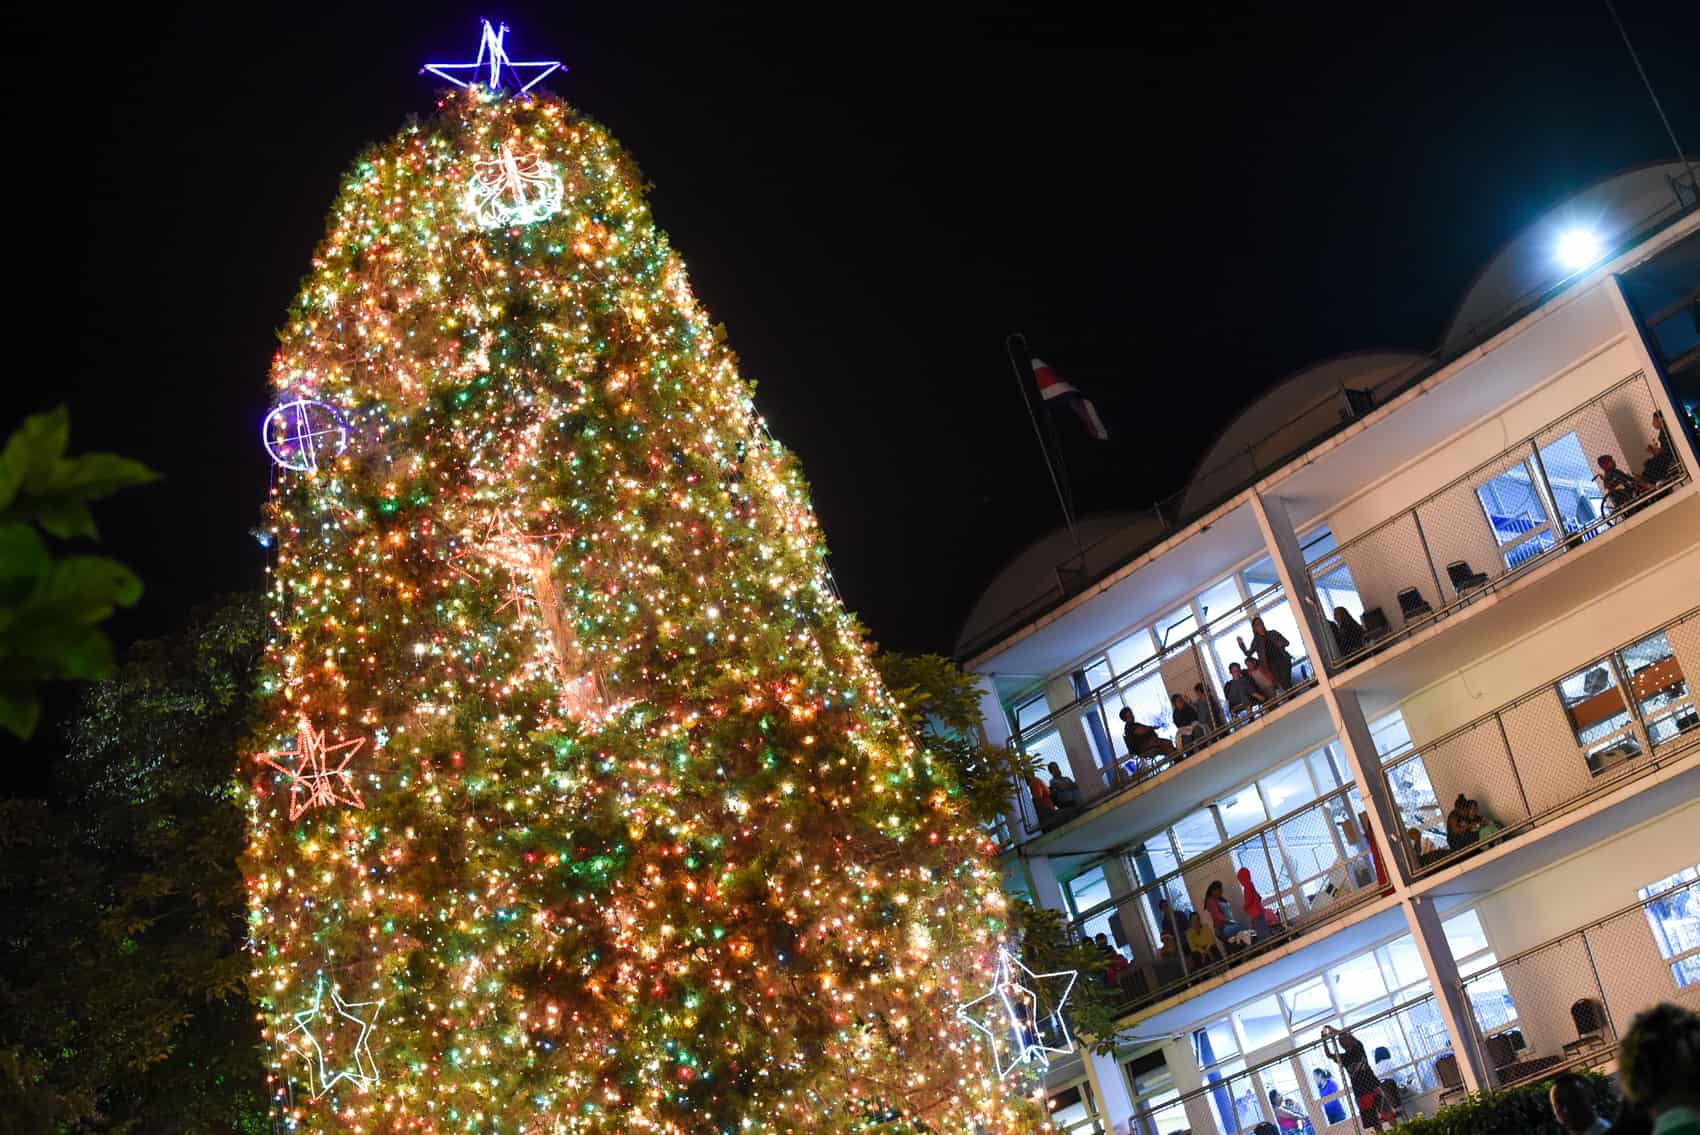 The annual lighting of the Christmas tree at the Children's Hospital in downtown San José took place Thursday night.